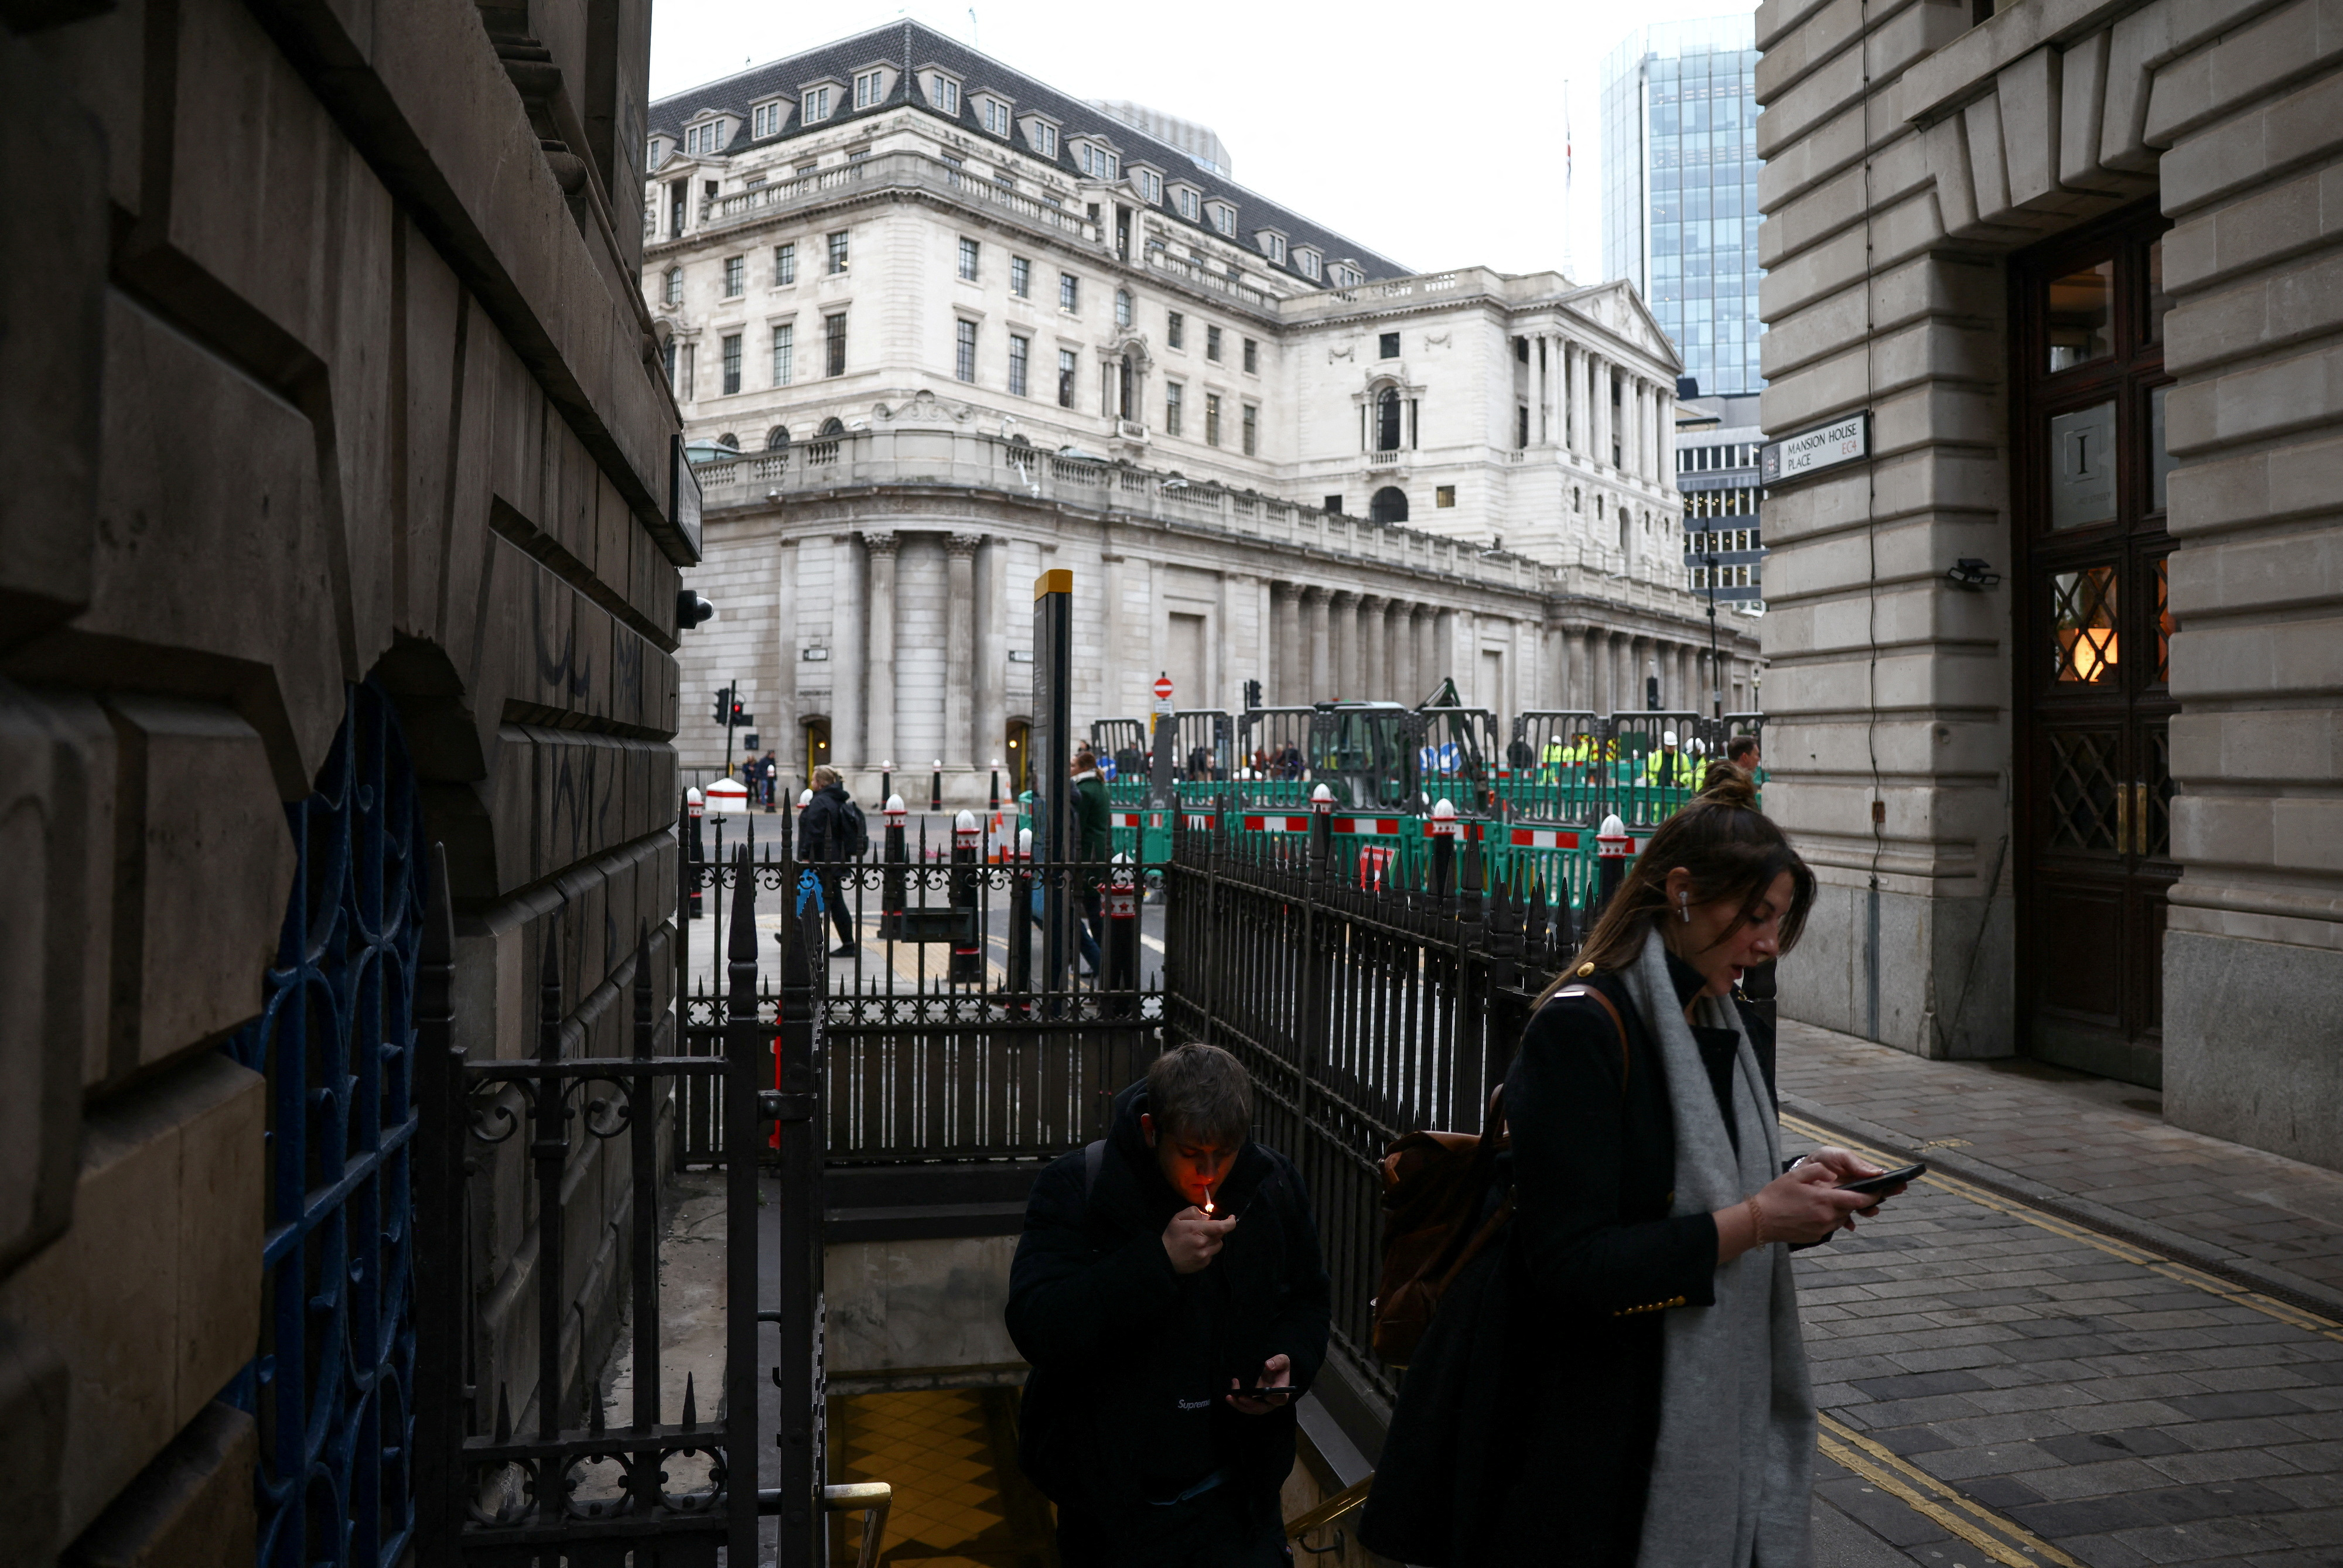 People exit Bank underground station outside the Bank of England in the City of London financial district